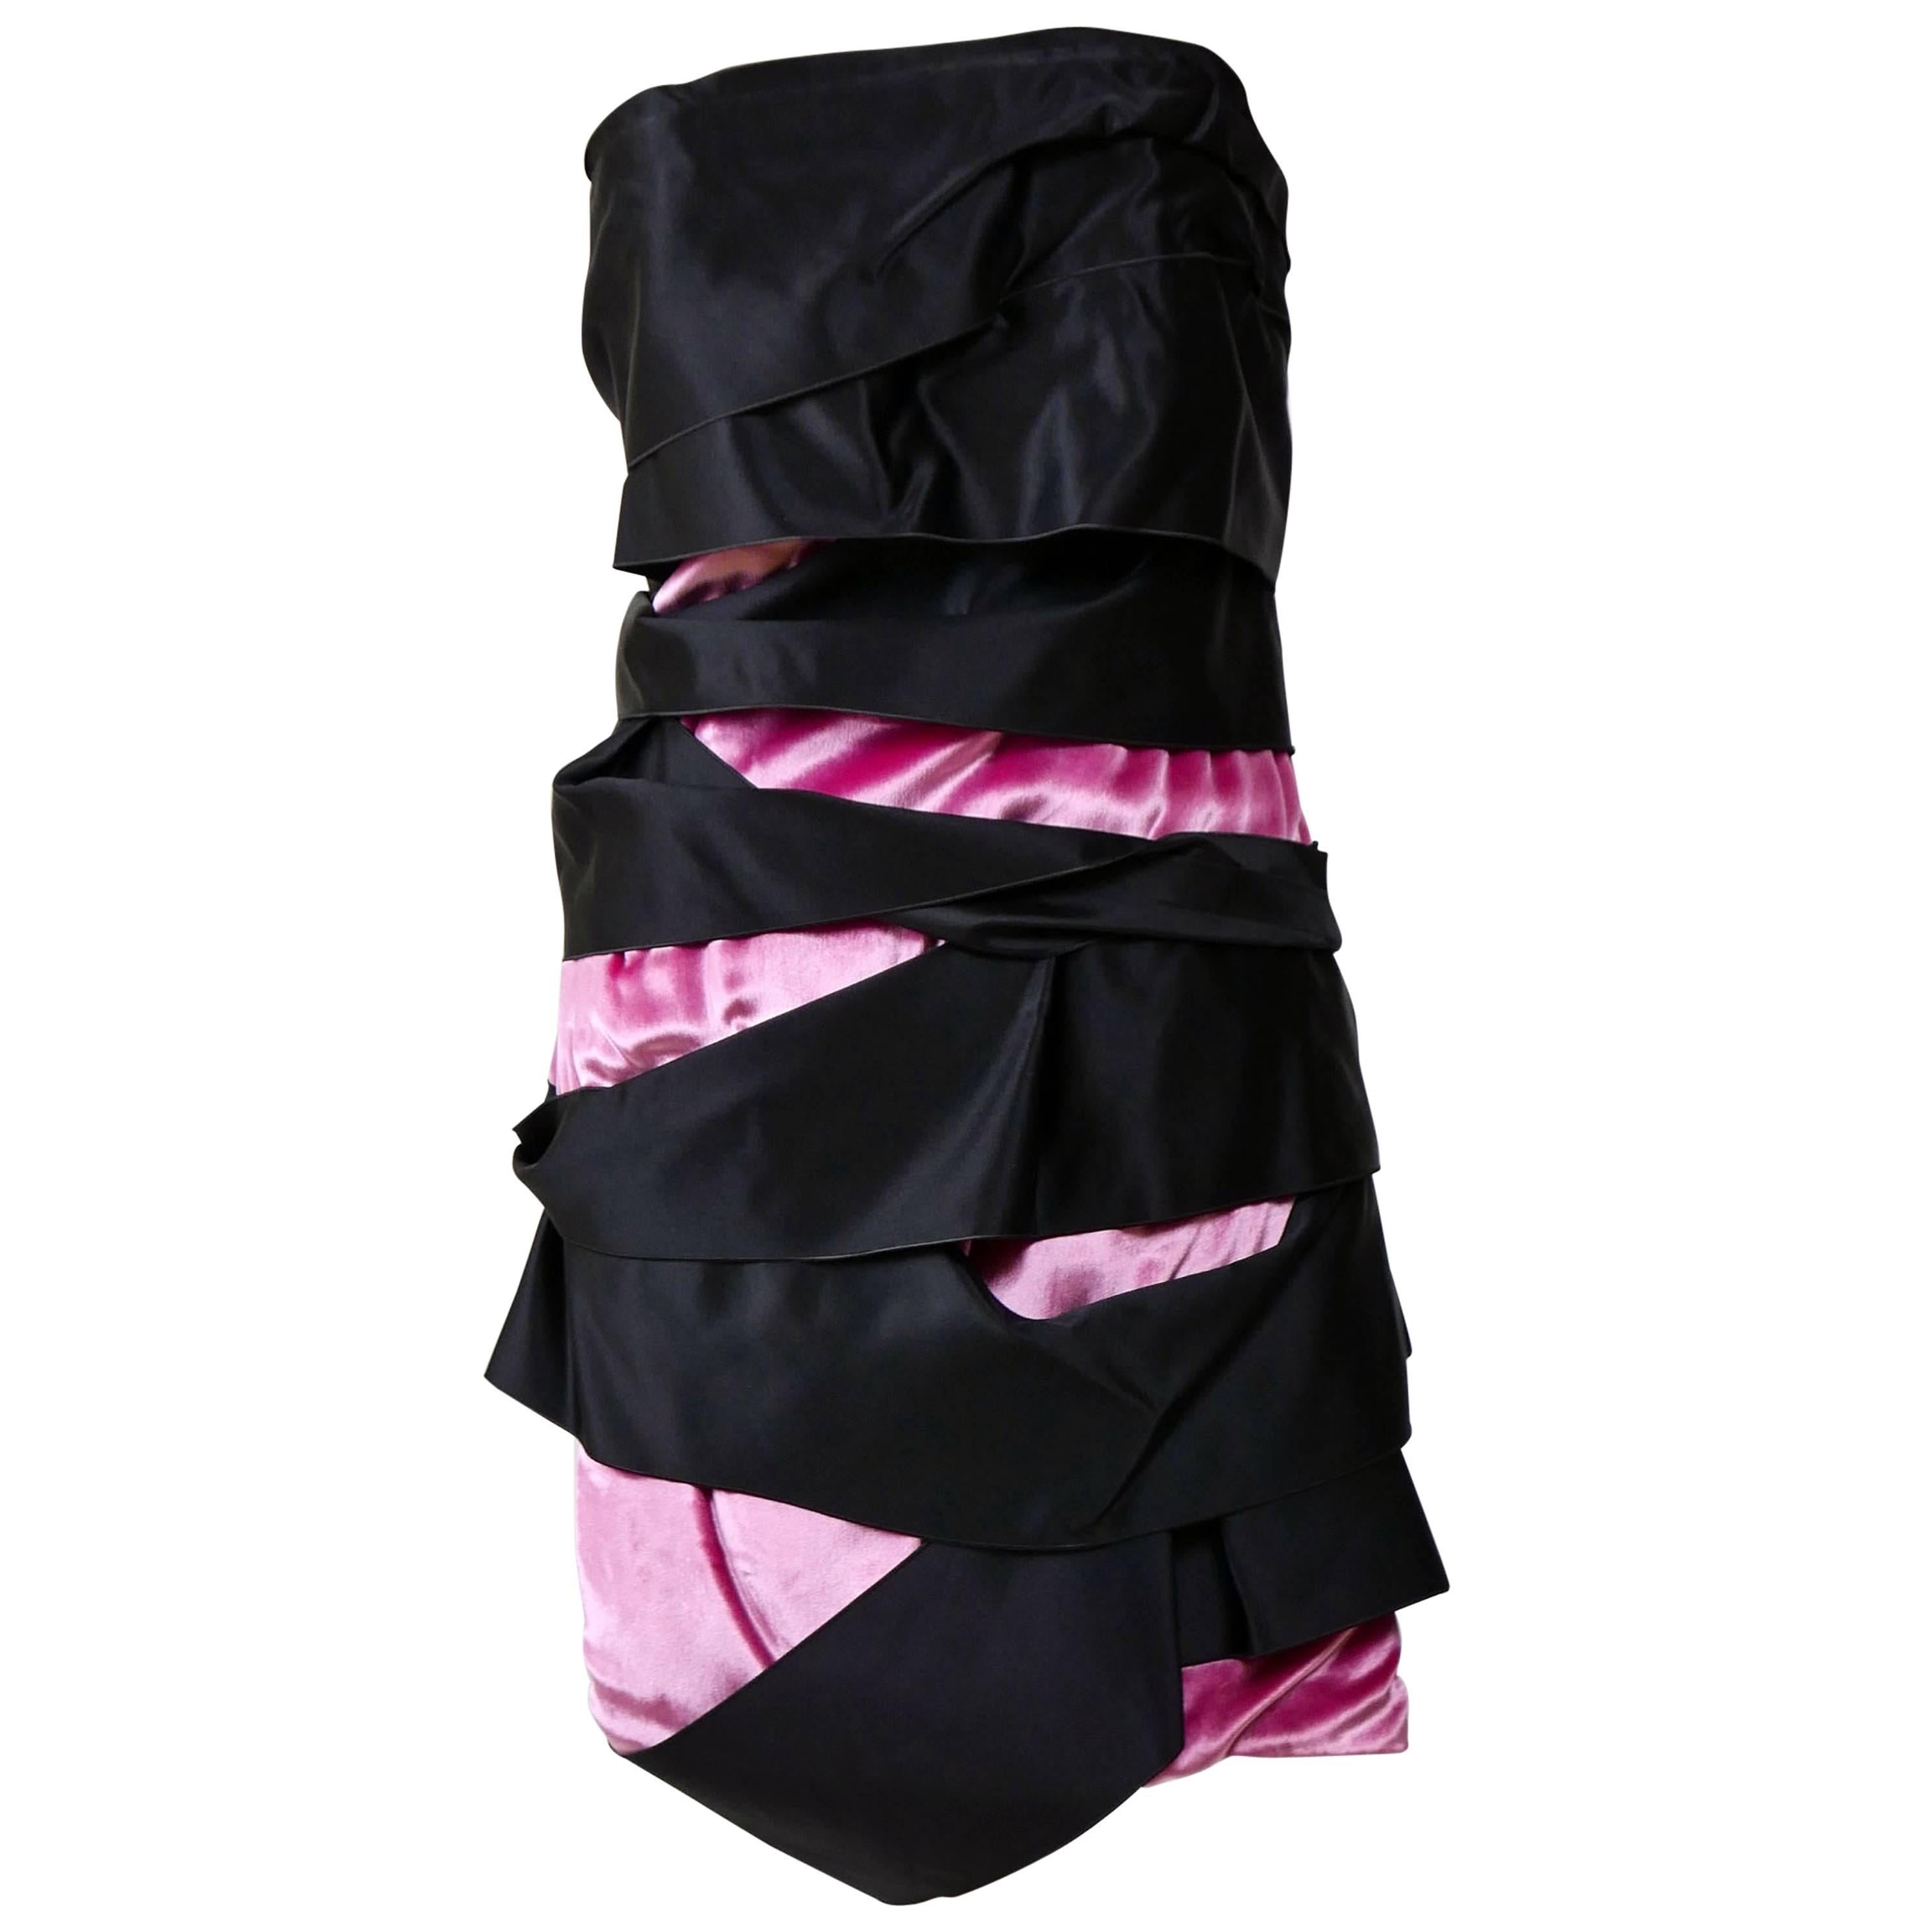 MARC JACOBS Black and Pink Strapless Mini Dress For Sale